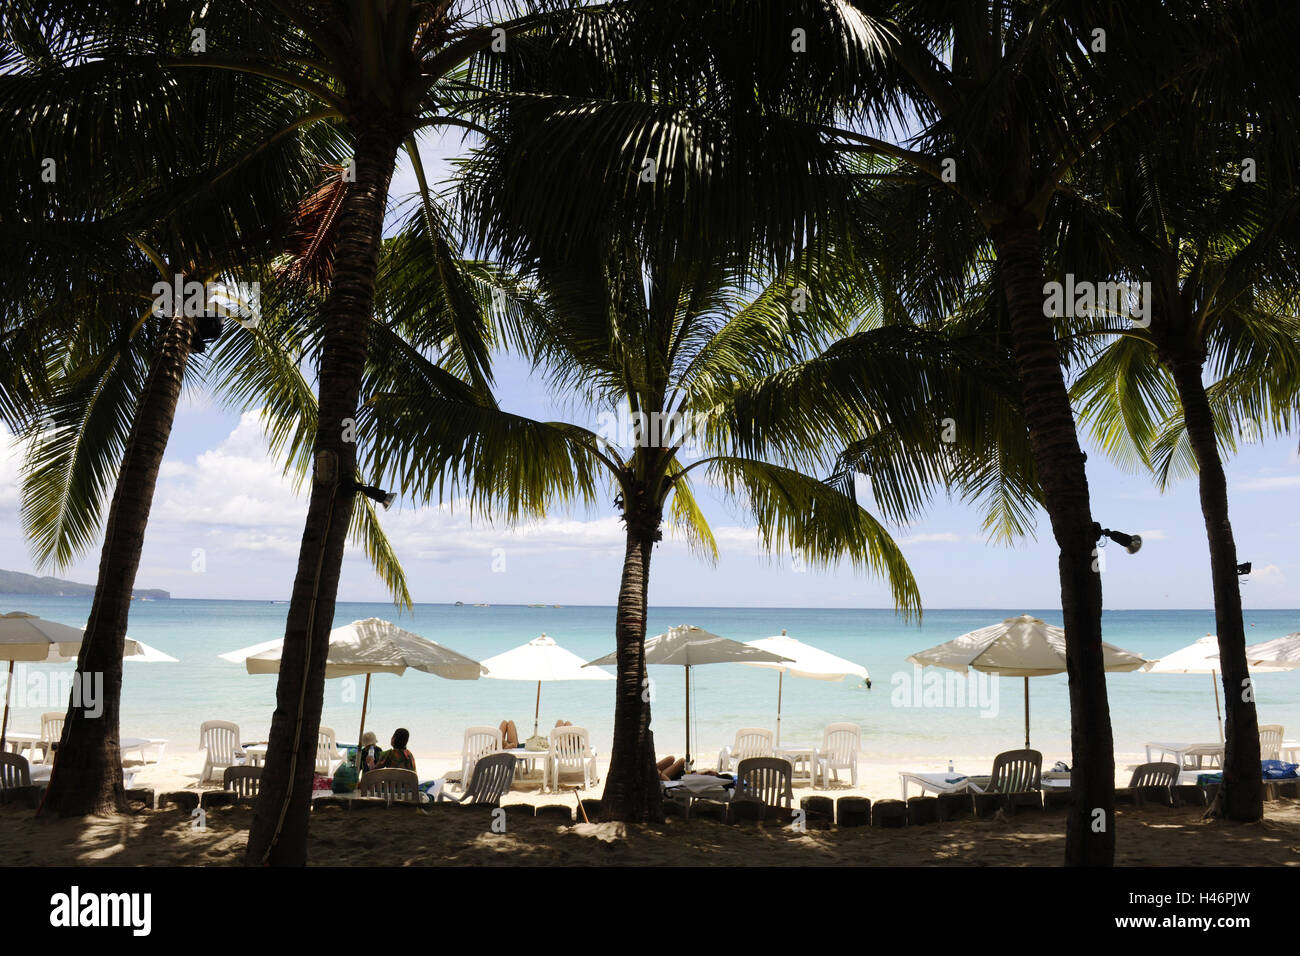 The Philippines, Boracay, palms, deck chairs, sea, water, heaven, sunshades, vacation, travelling, holidays, vacationers, people, distance, paradise, leisure time, view, Stock Photo